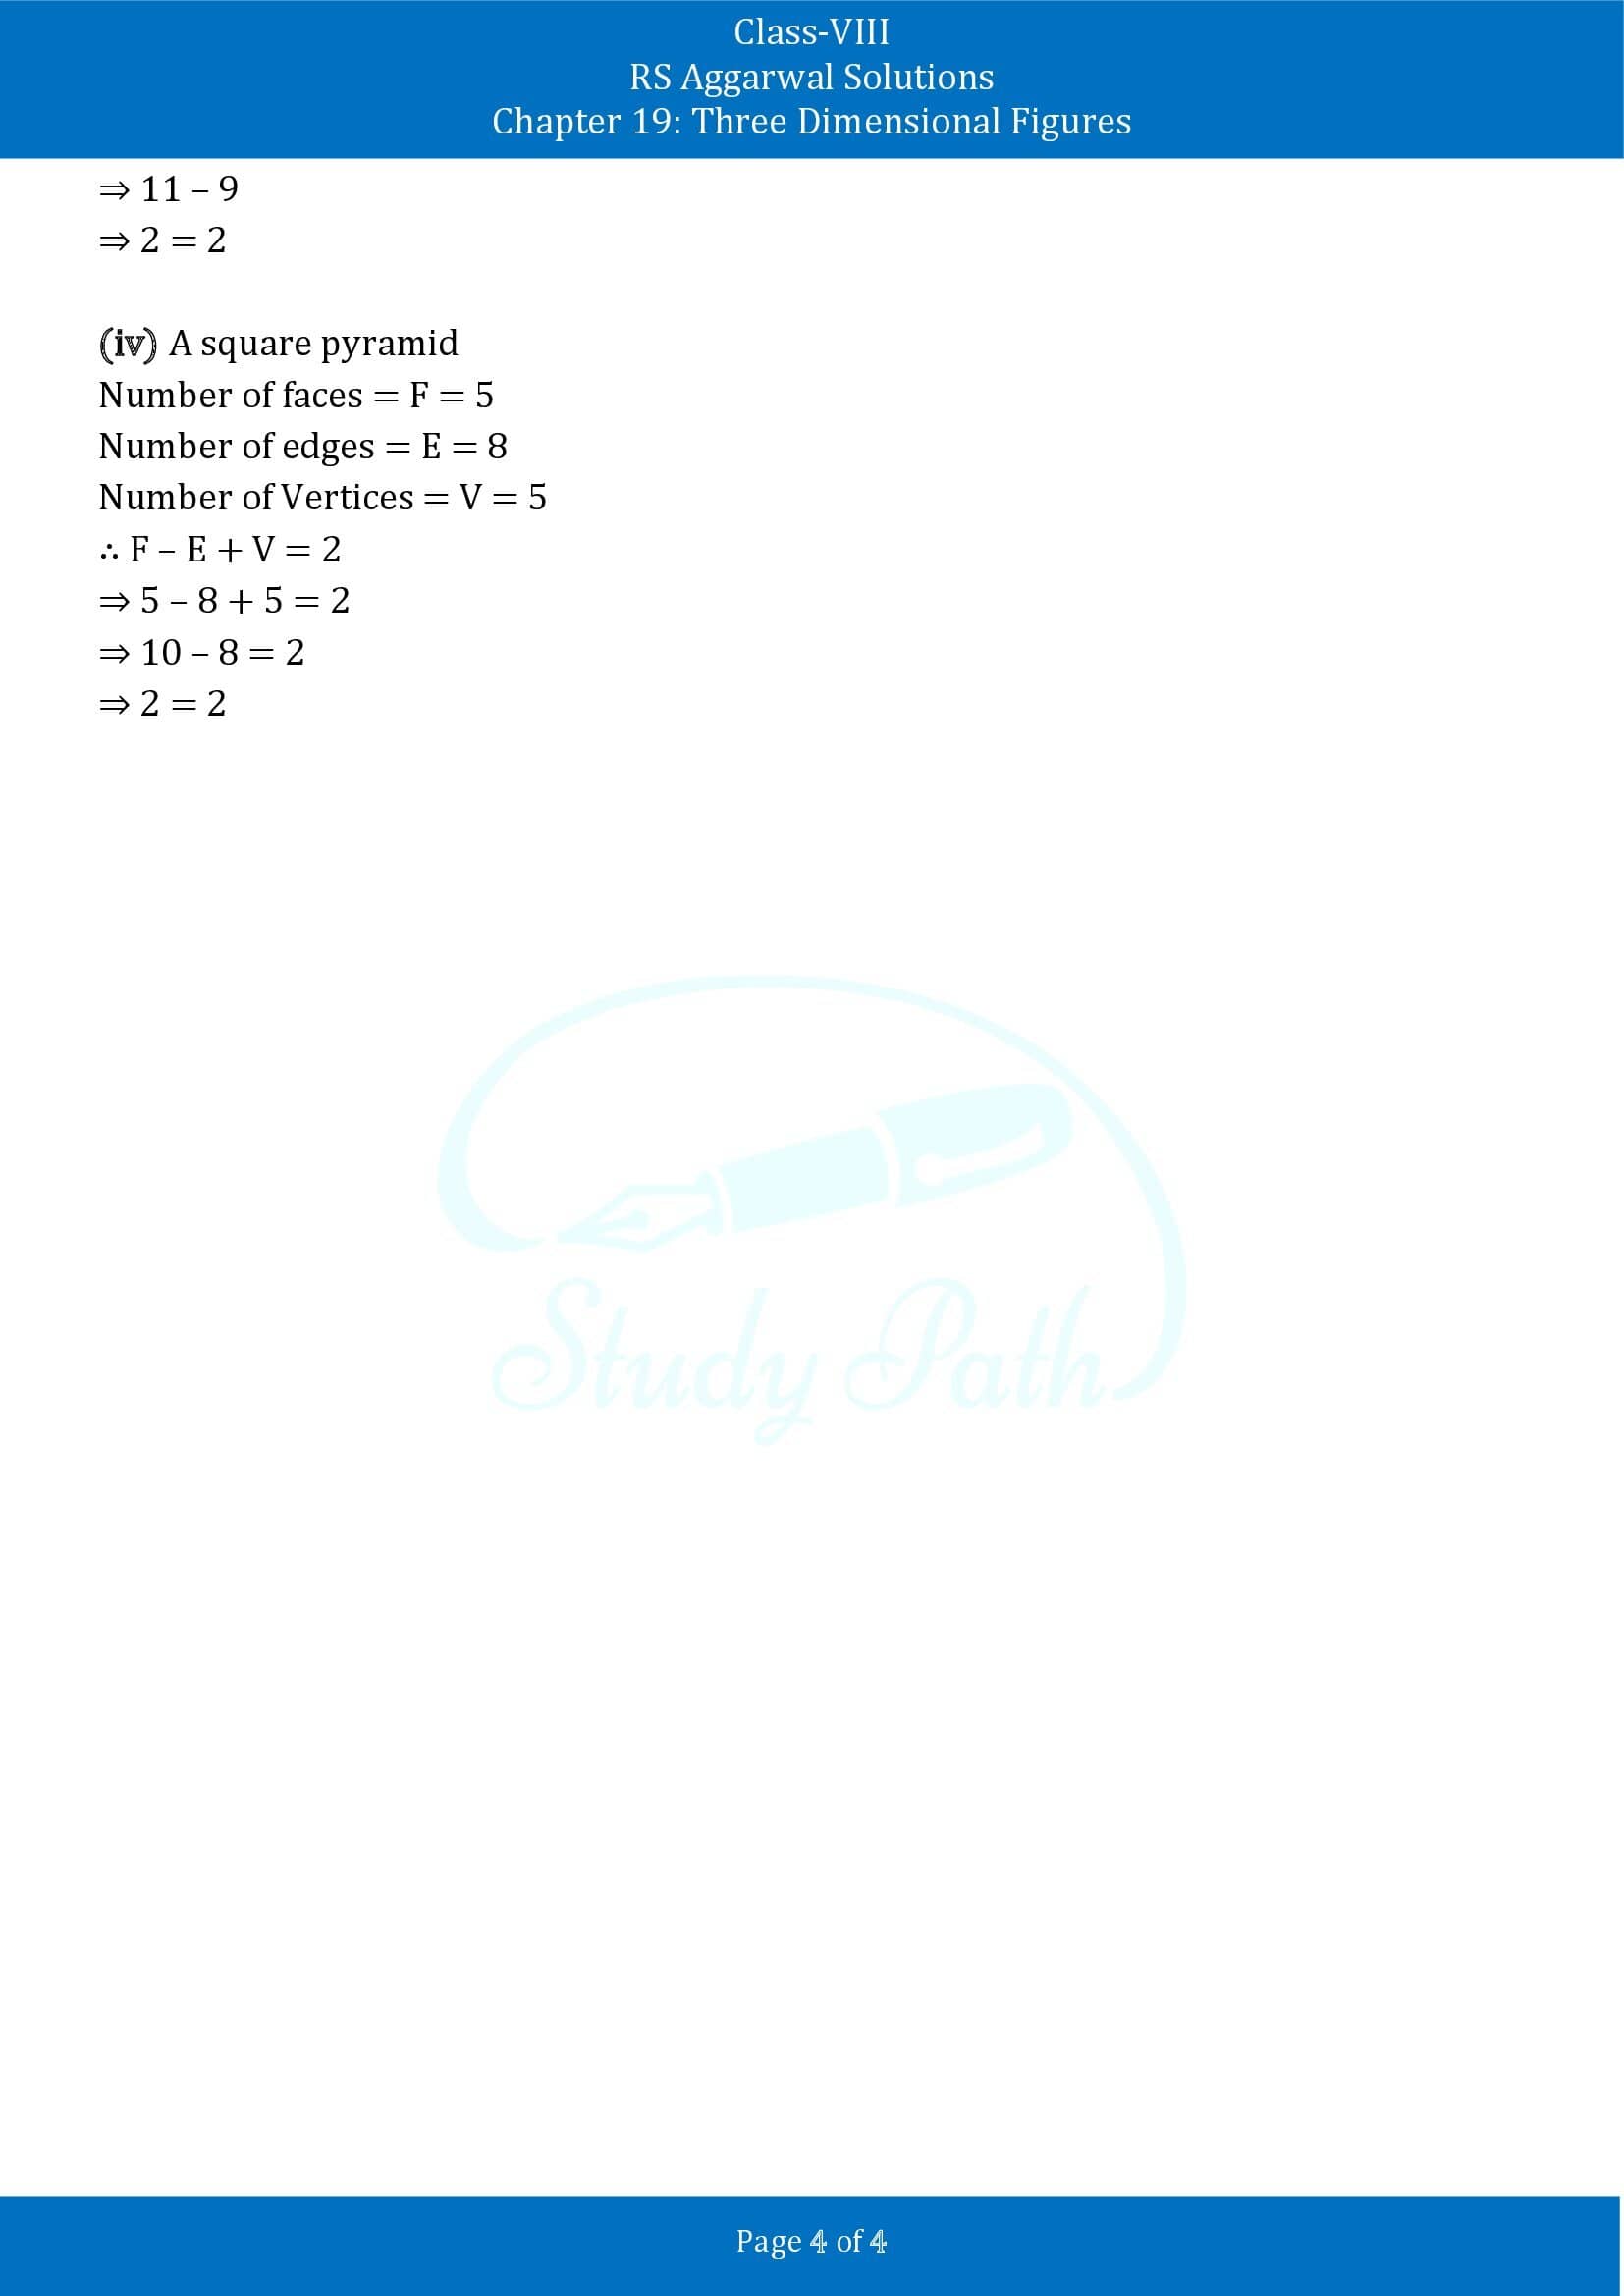 RS Aggarwal Solutions Class 8 Chapter 19 Three Dimensional Figures Exercise 19B 00004